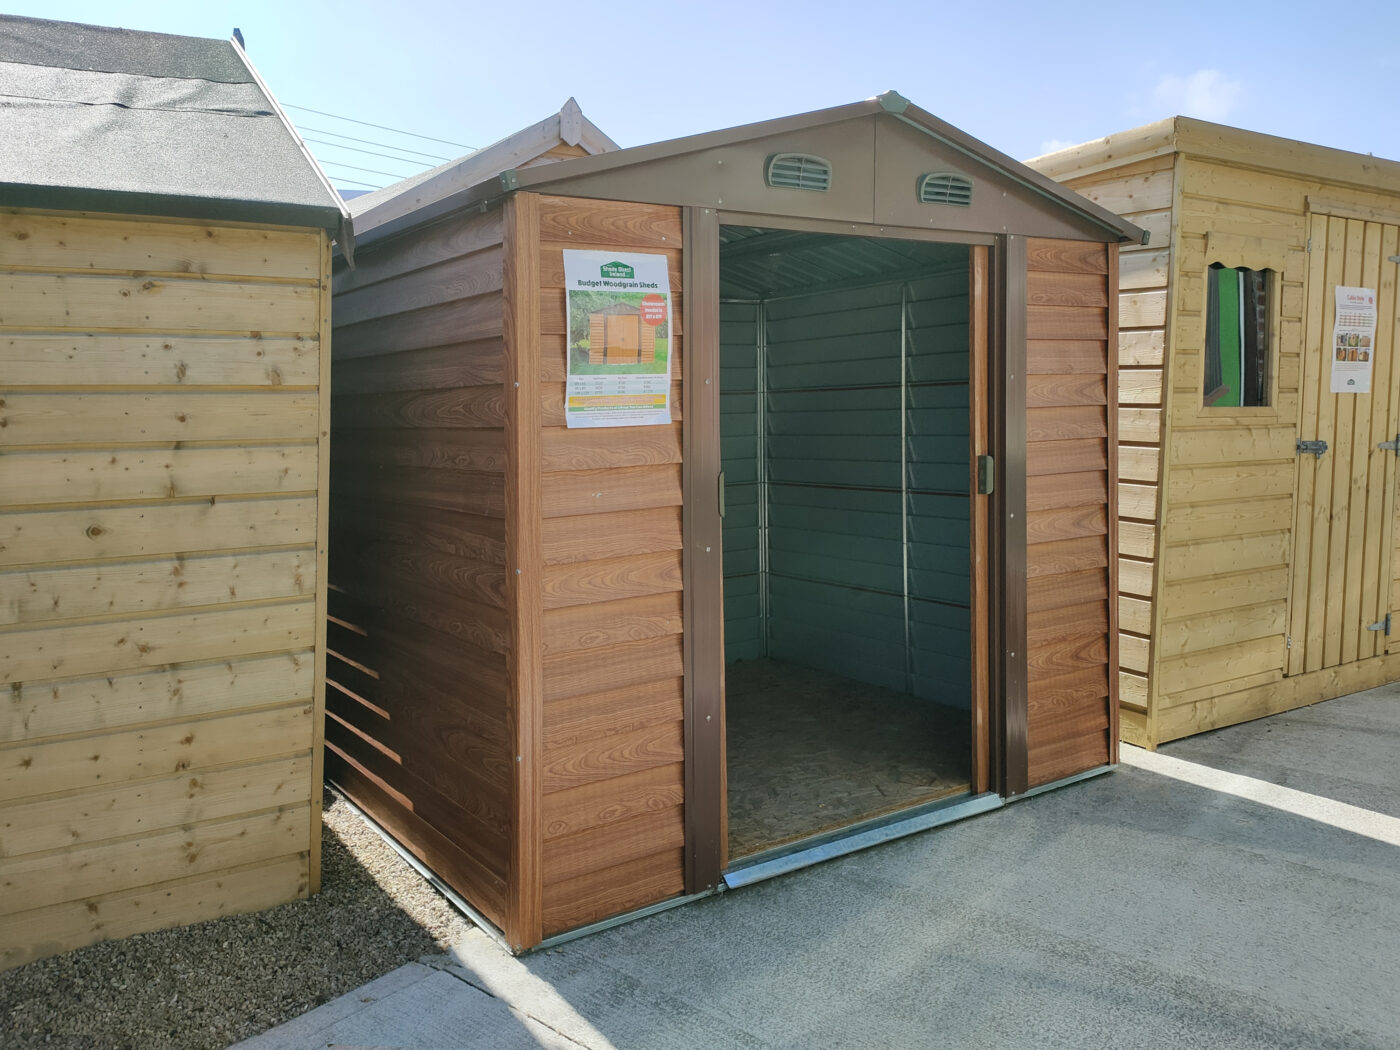 A woodgrain metal shed in sheds direct Ireland's yard